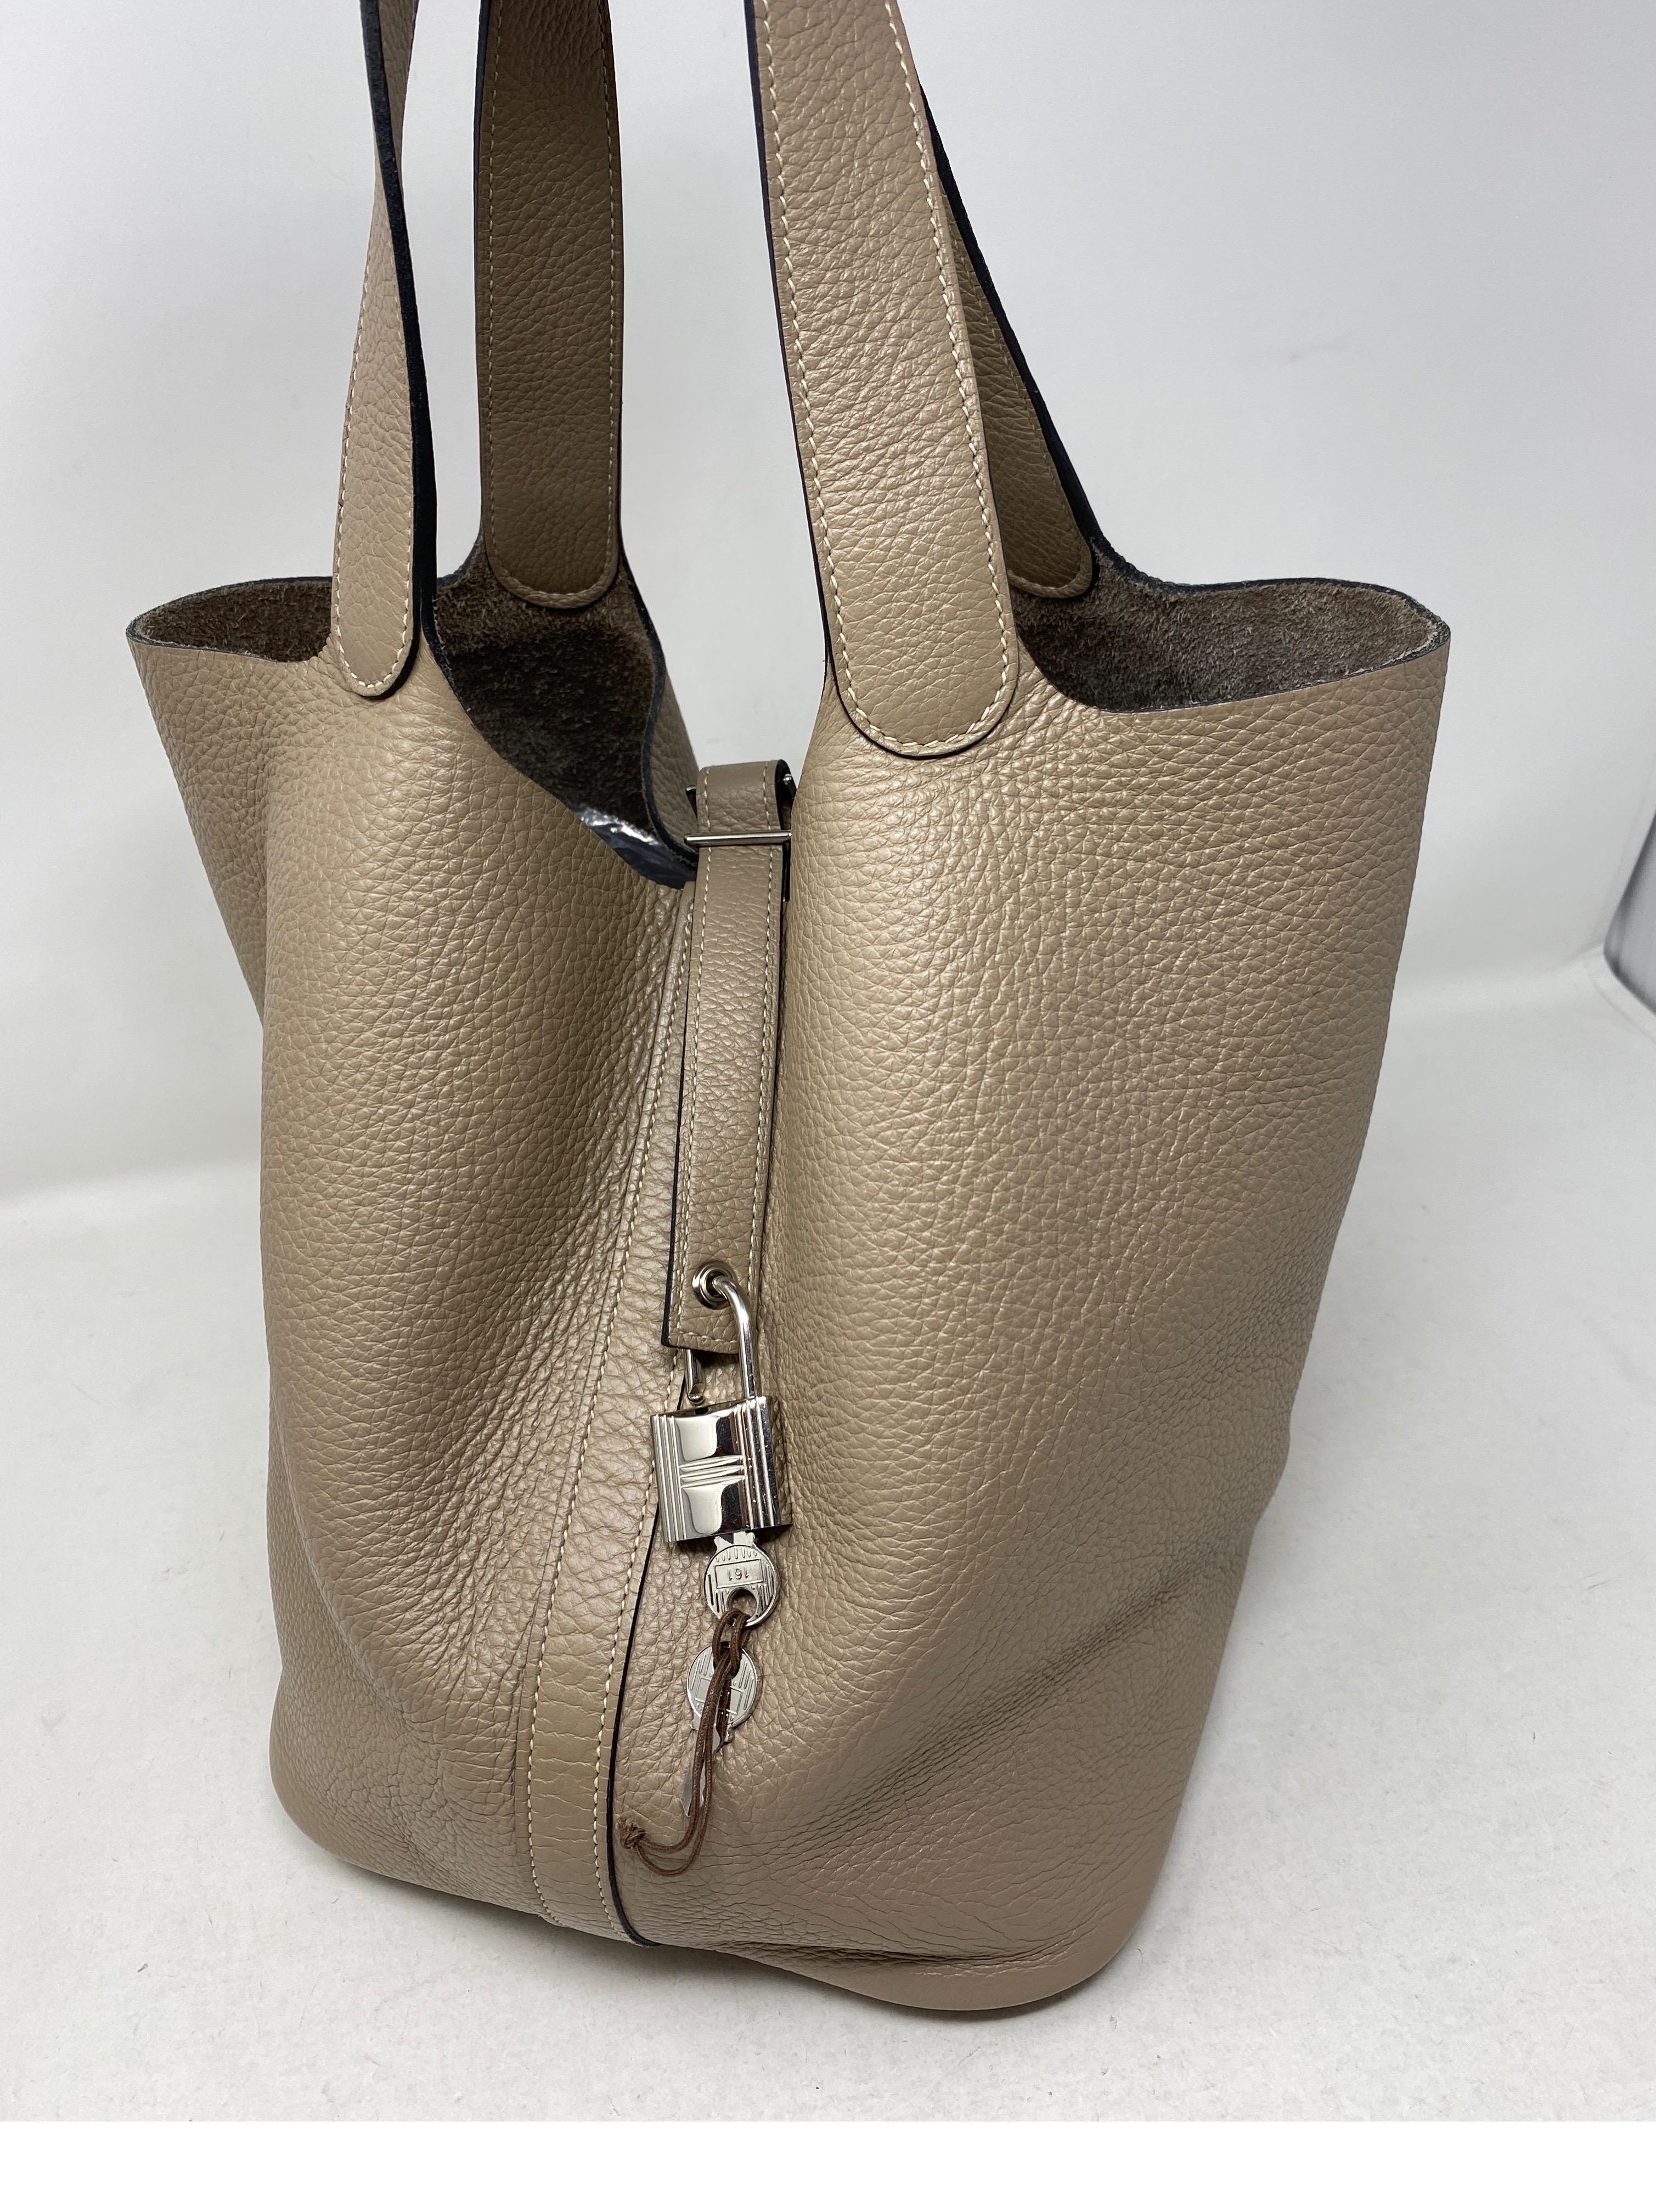 Hermes Etoupe Picotin GM Bag. Excellent like new condition. Beautiful light grey color bag. Palladium hardware. Larger GM size bag. Beautiful leather from Hermes. Don't miss out on this one. Includes lock, keys, and dust cover. Guaranteed authentic. 